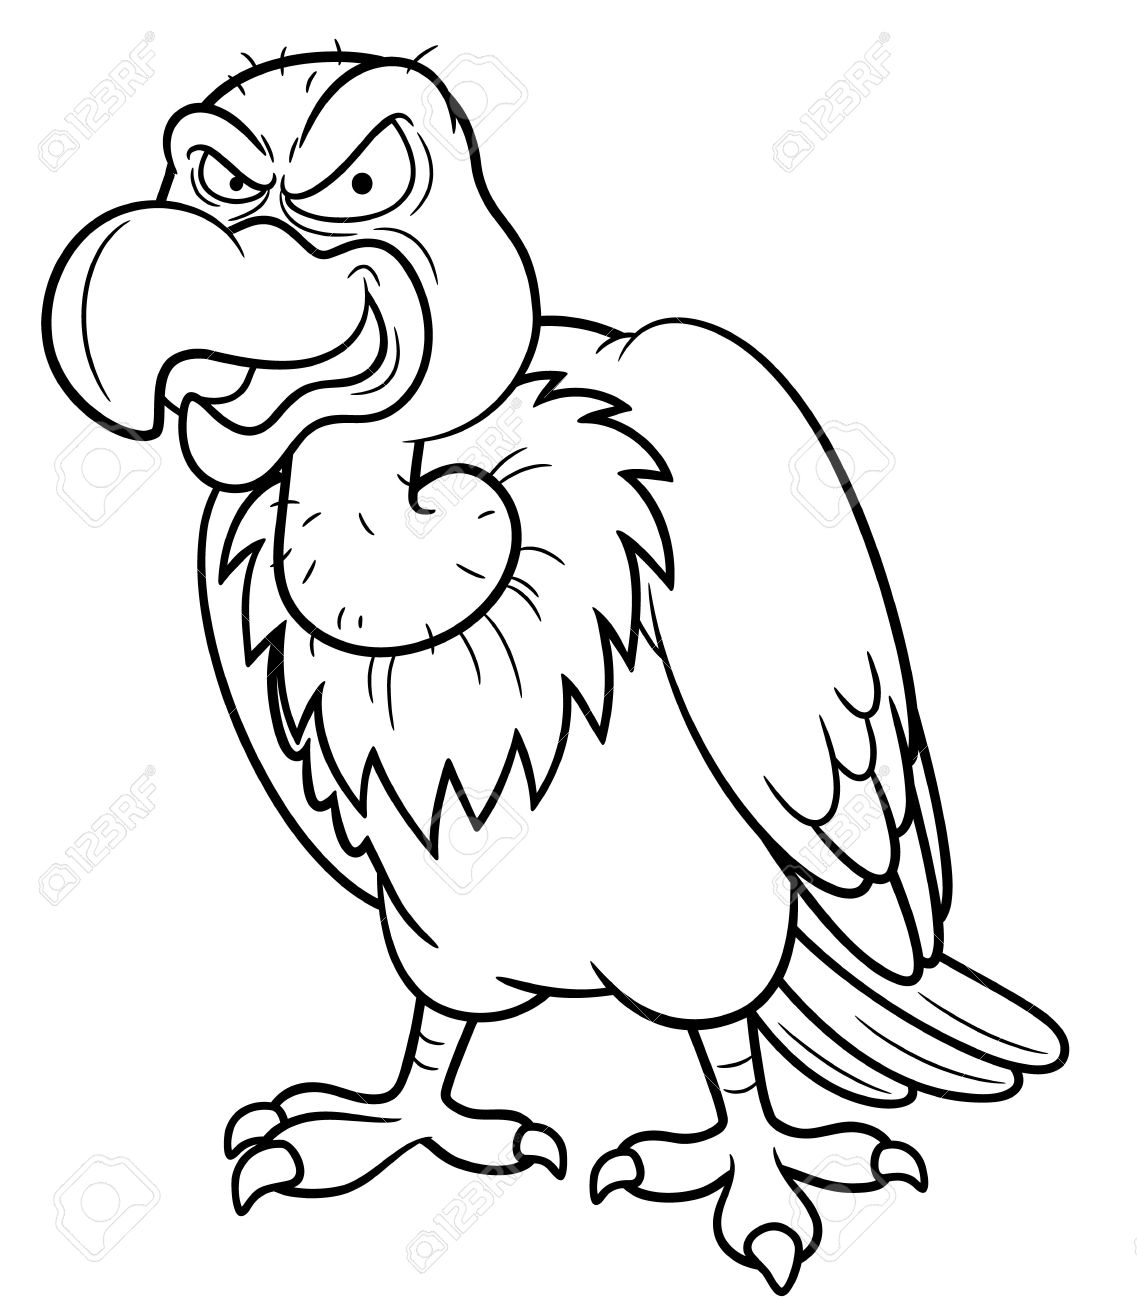 -vulture-Coloring-book-Stock-Vector